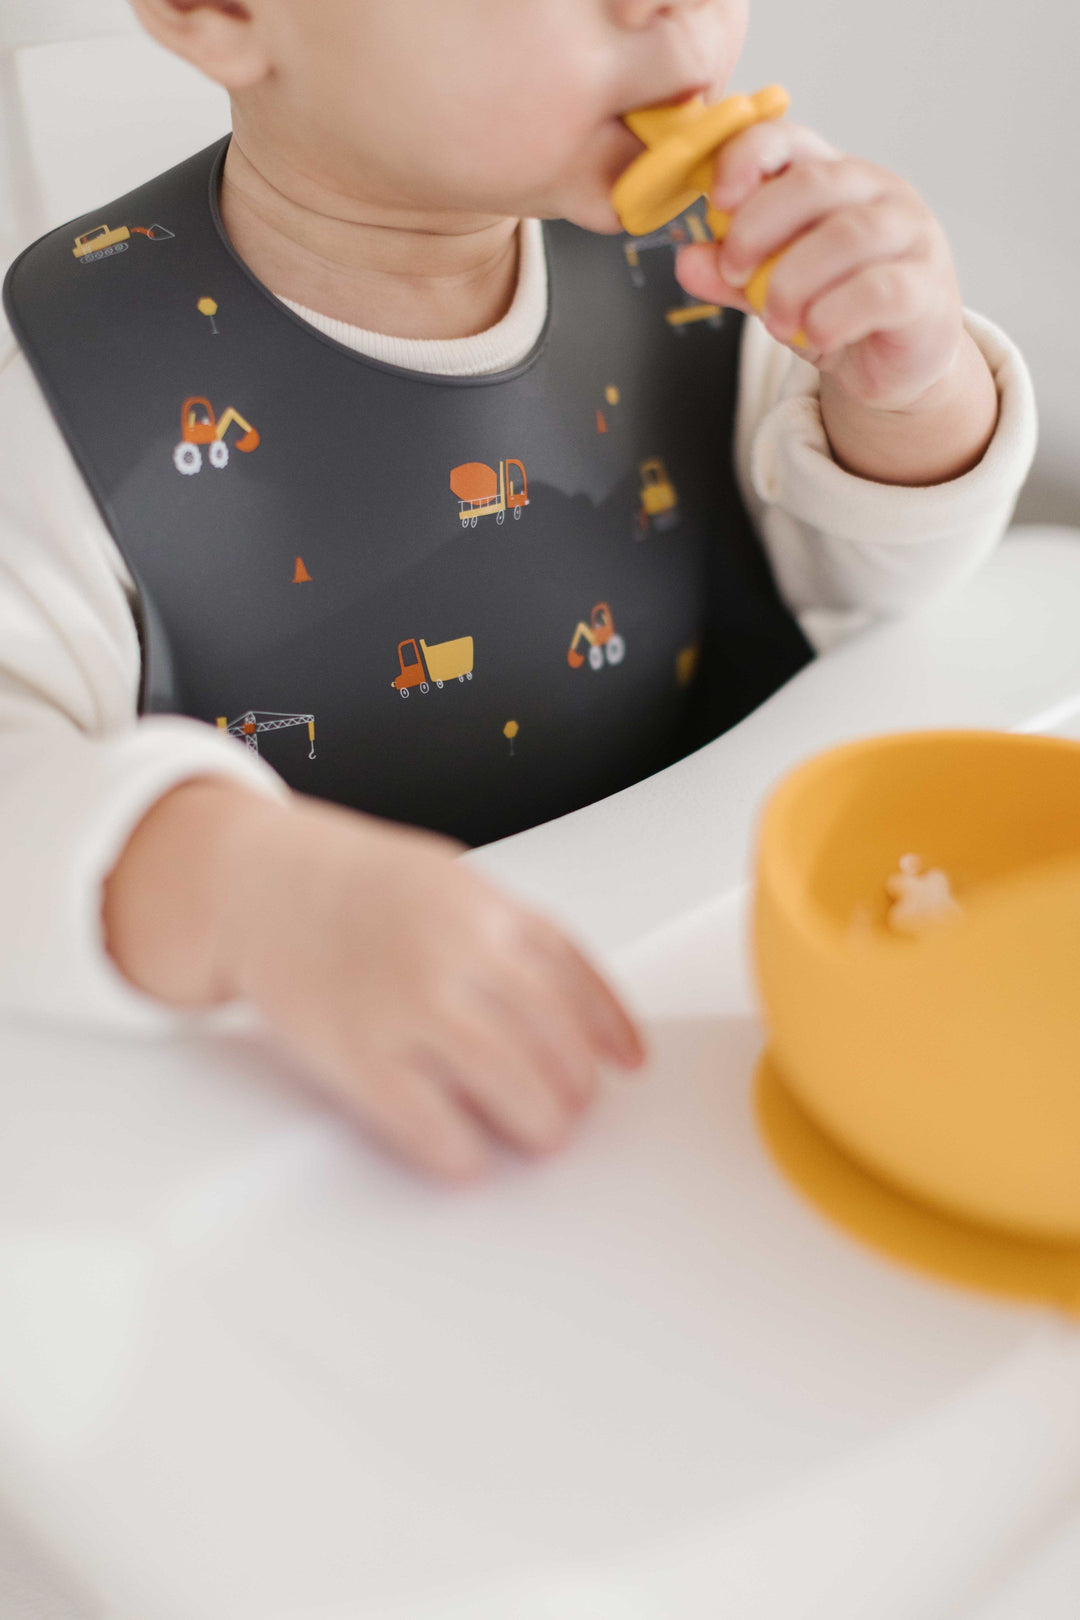 Baby Eating Cereal with charcoal gray silicone bib with construction trucks on it